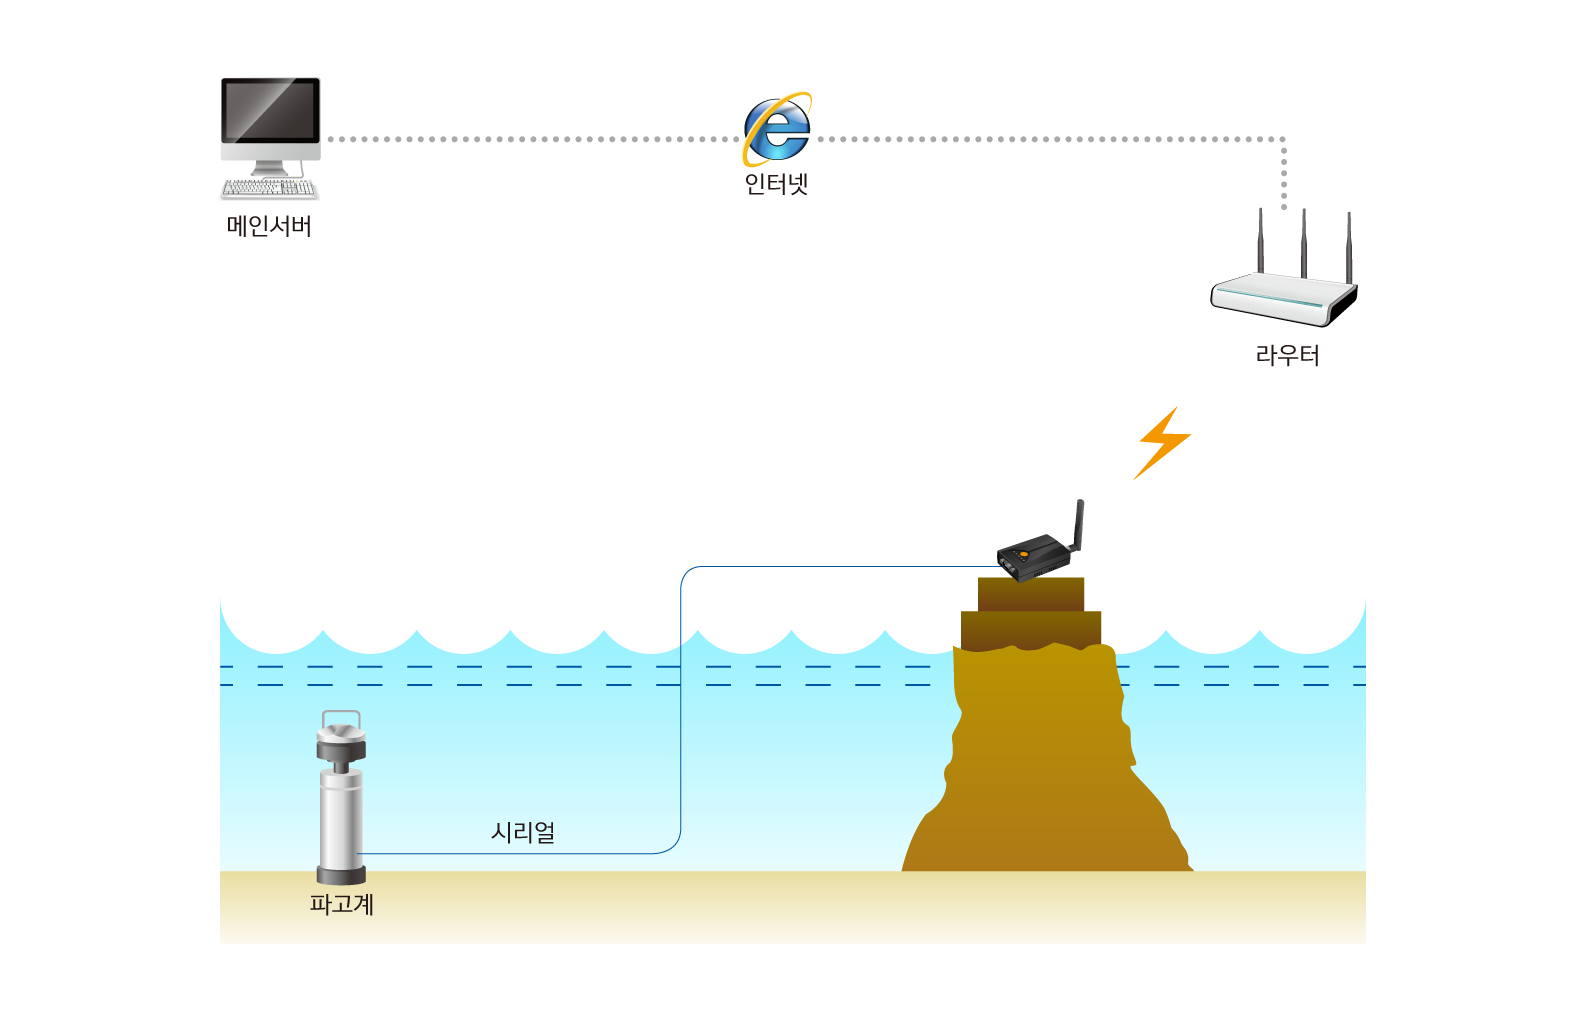 wave height monitoring system